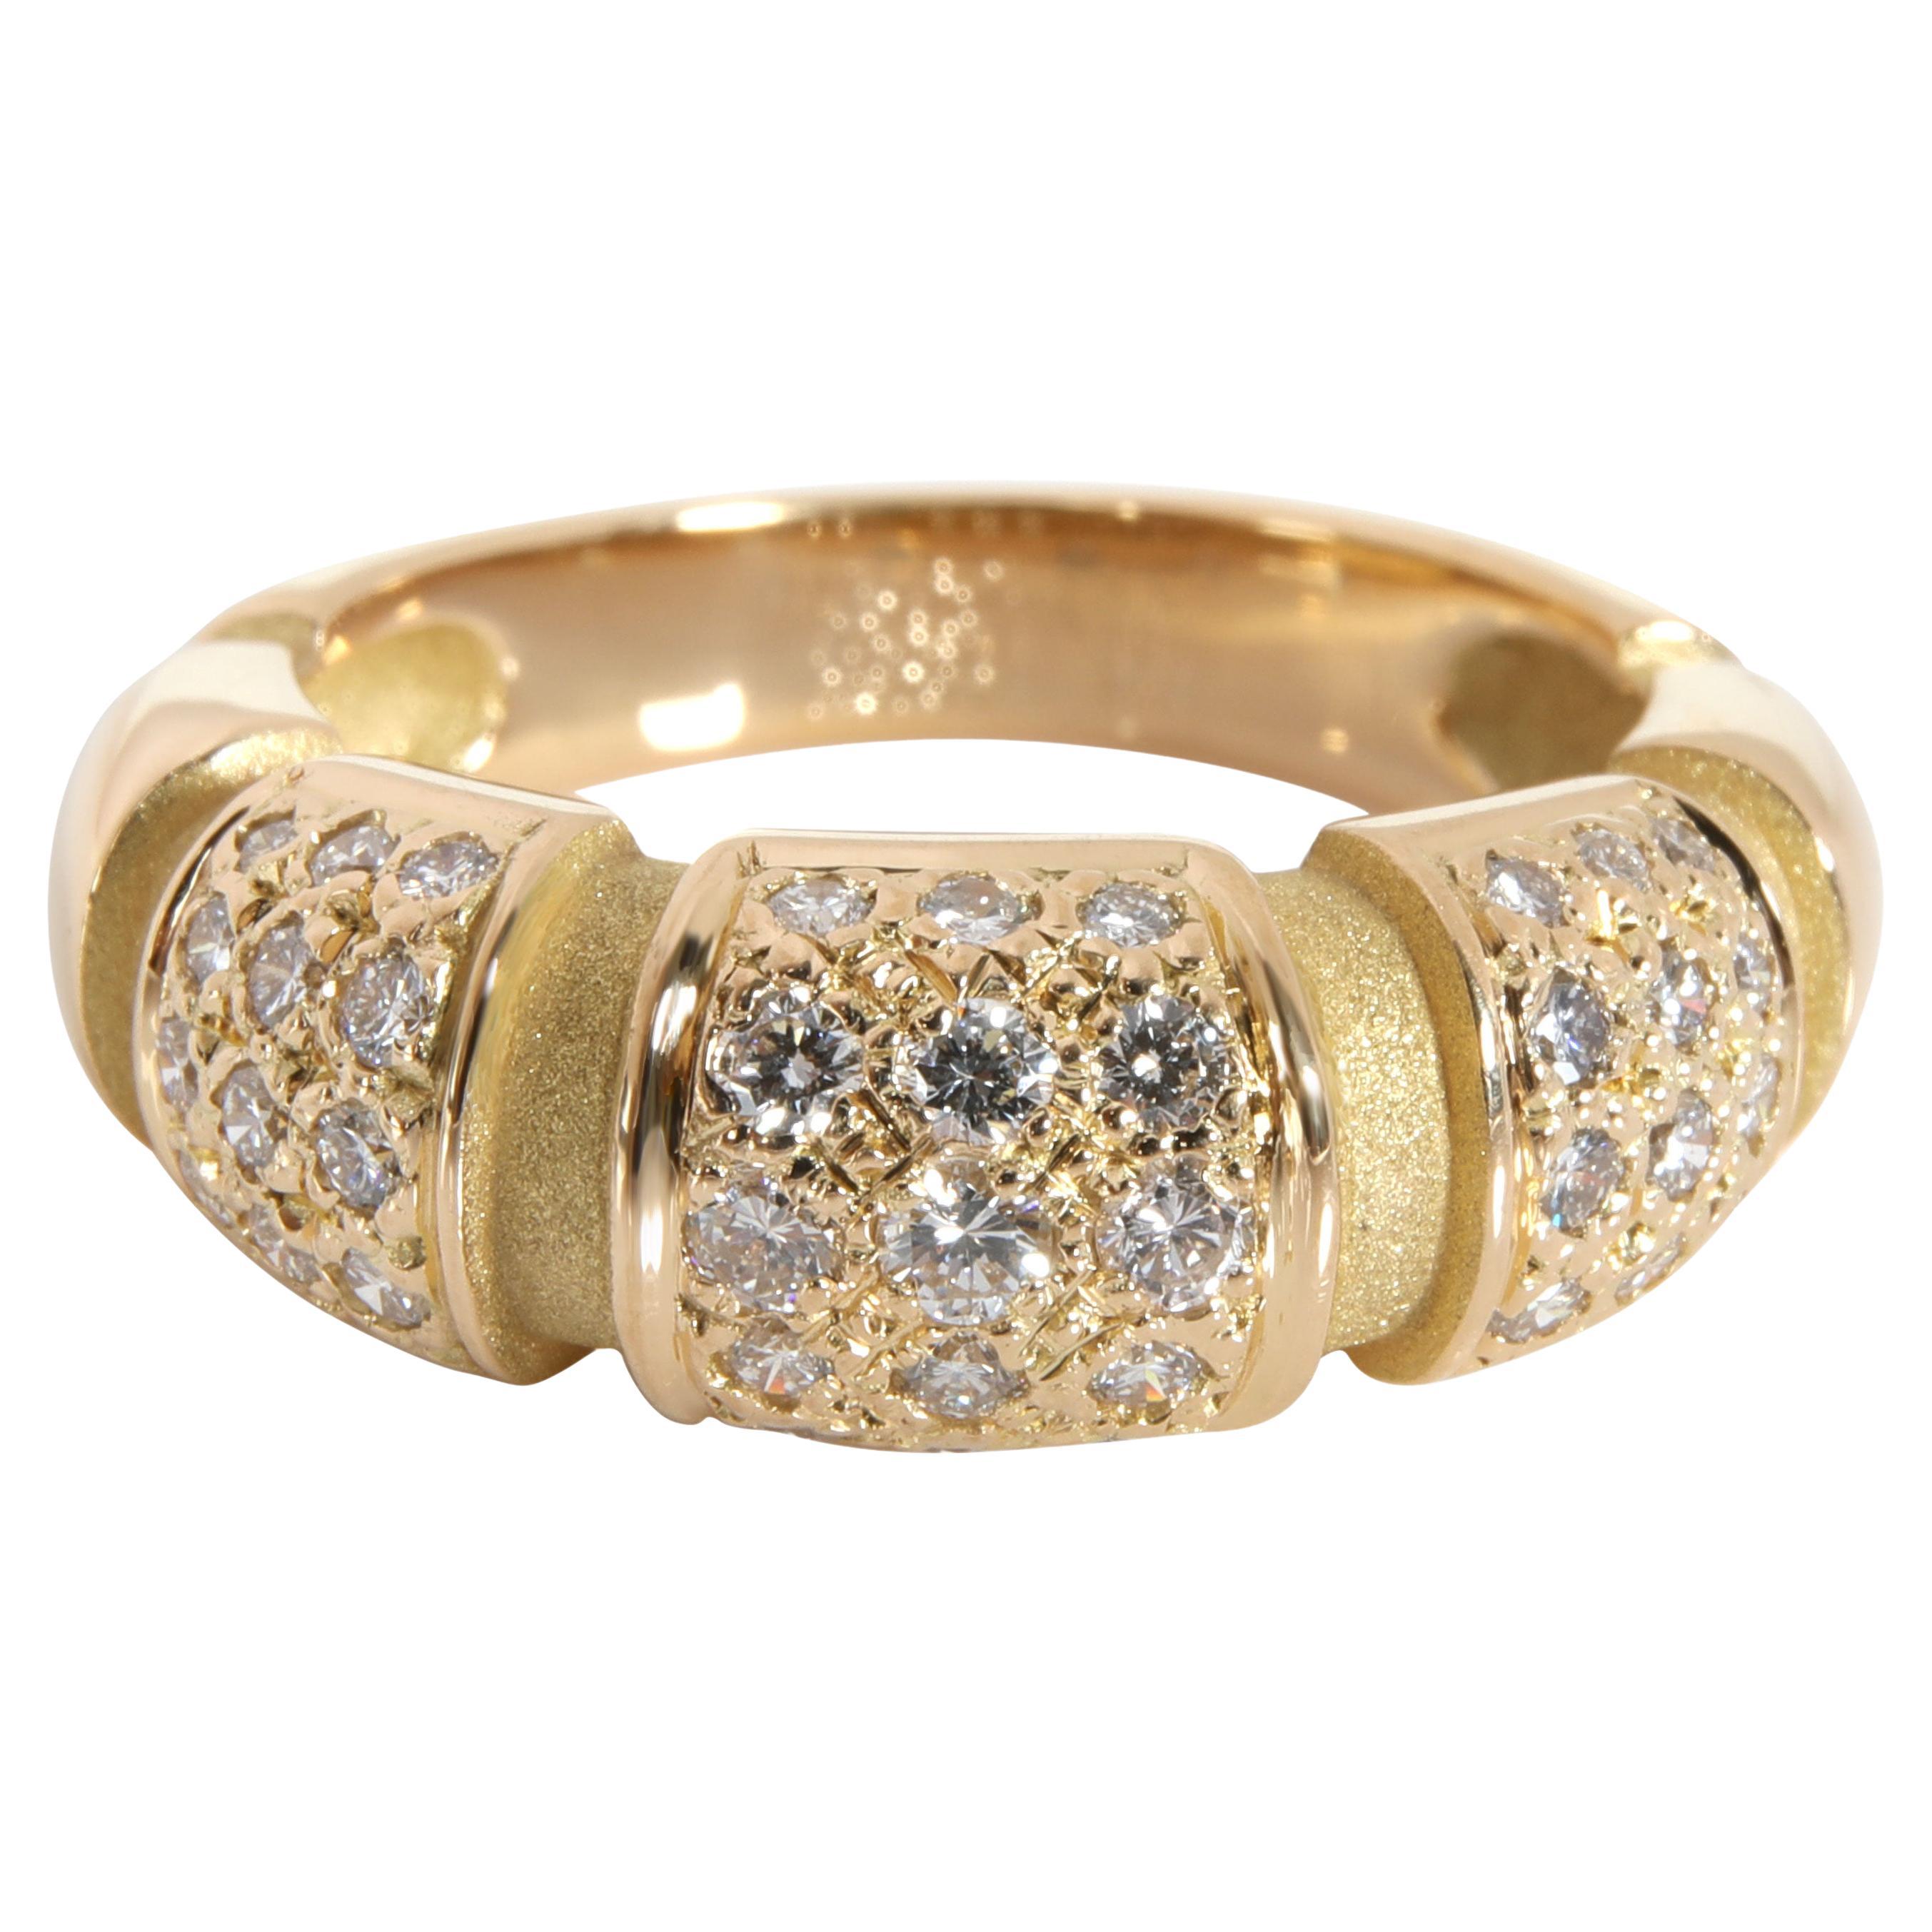 Mauboussin Nadja Diamond Ring in 18k Yellow Gold 0.79 CTW For Sale